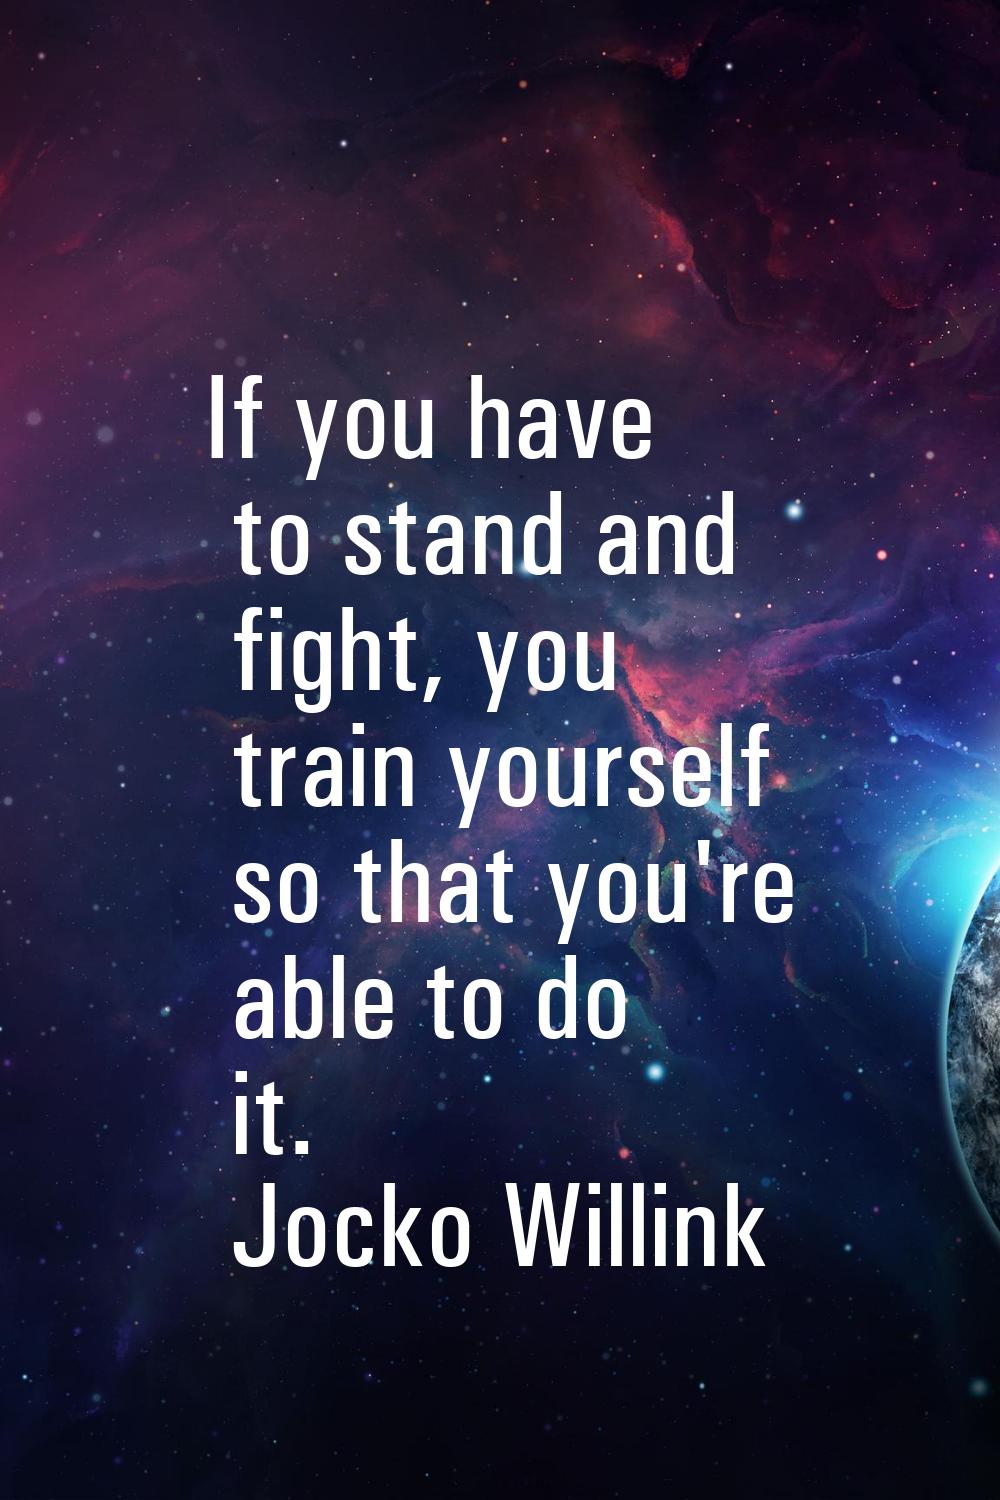 If you have to stand and fight, you train yourself so that you're able to do it.